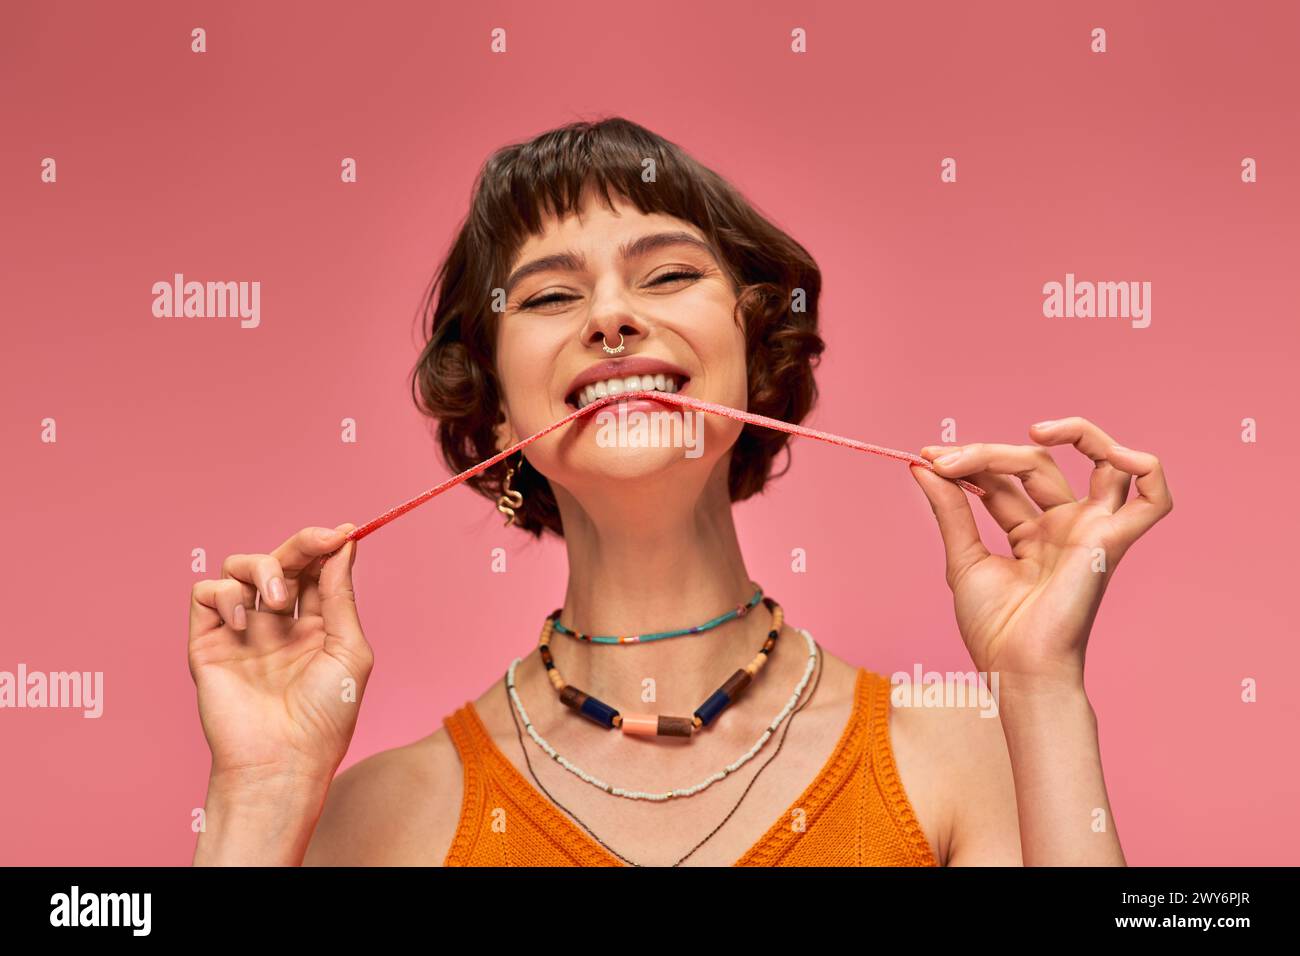 delighted and young woman with nose piercing biting sweet and sour candy strip on pink background Stock Photo